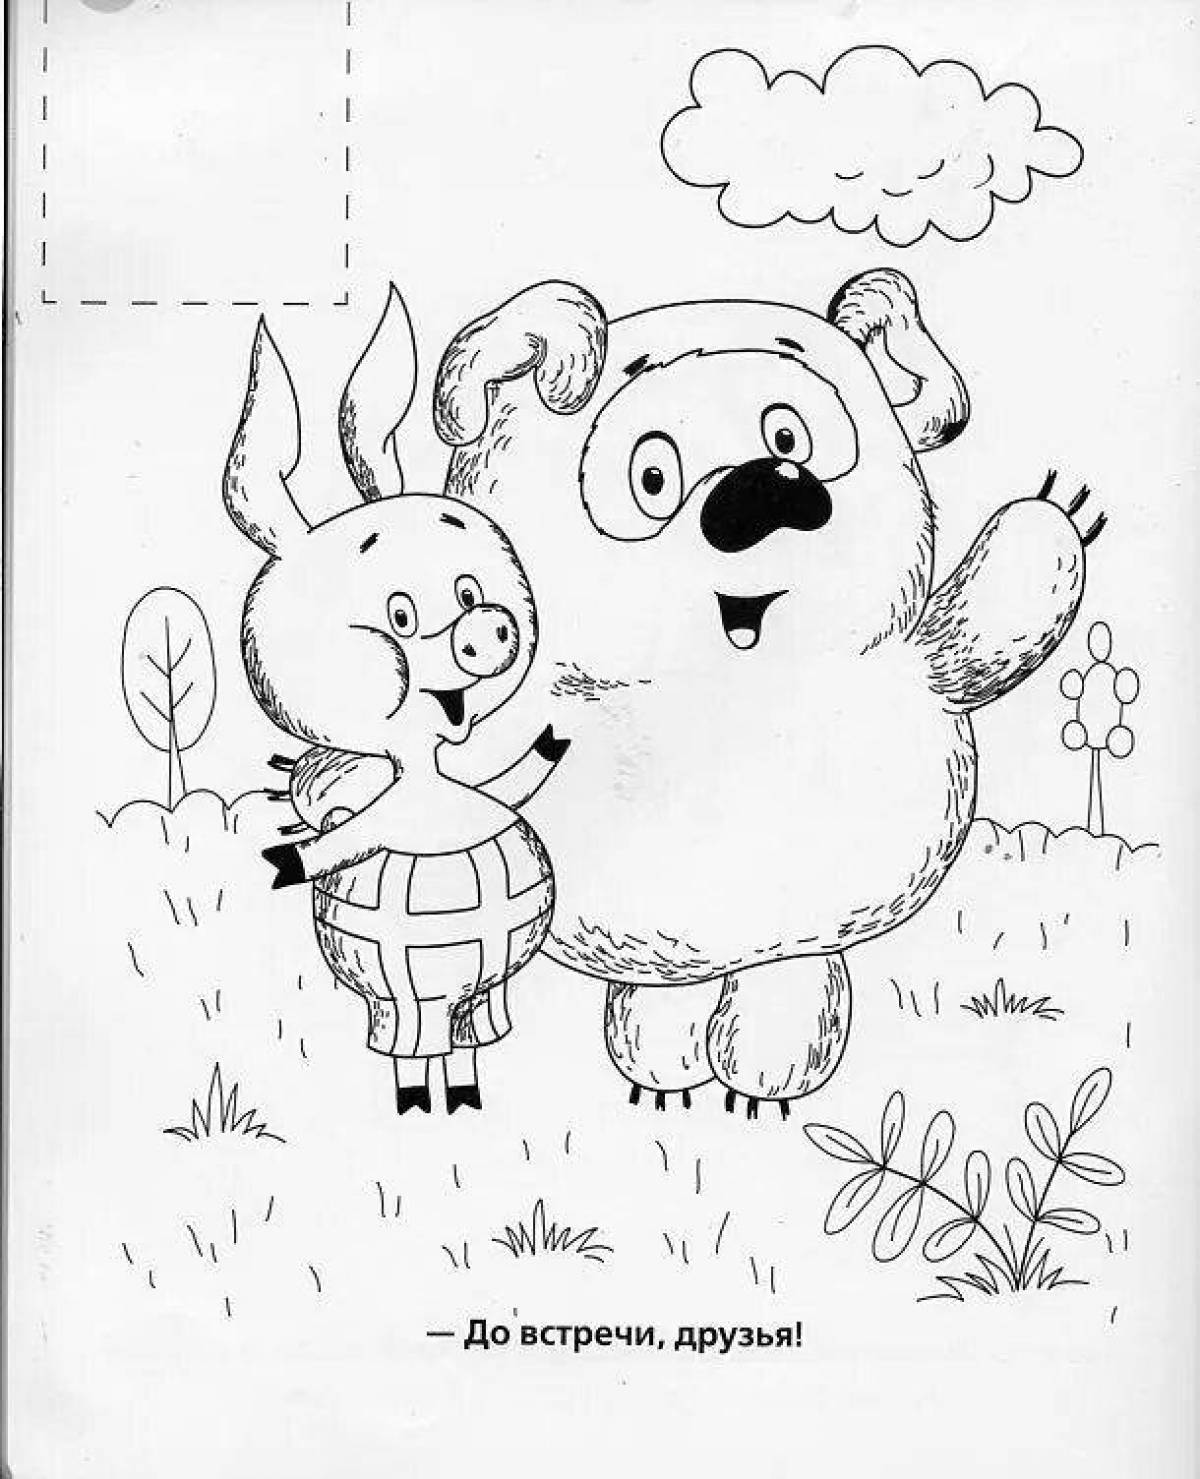 Adorable Winnie the Pooh and Piglet coloring book